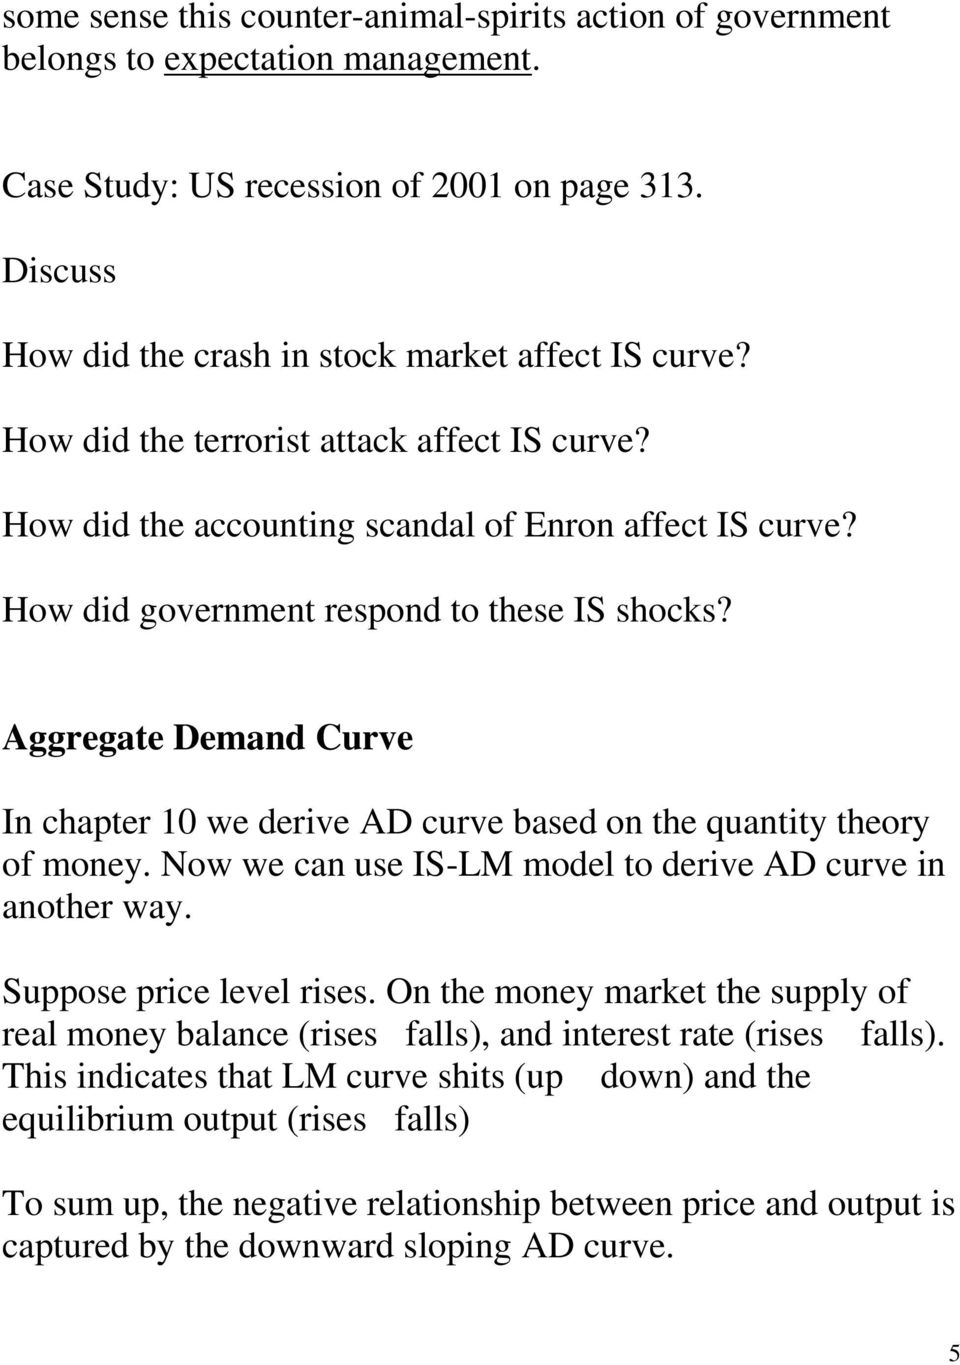 Aggregate Demand Curve In chapter 10 we derive AD curve based on the quantity theory of money. Now we can use IS-LM model to derive AD curve in another way. Suppose price level rises.